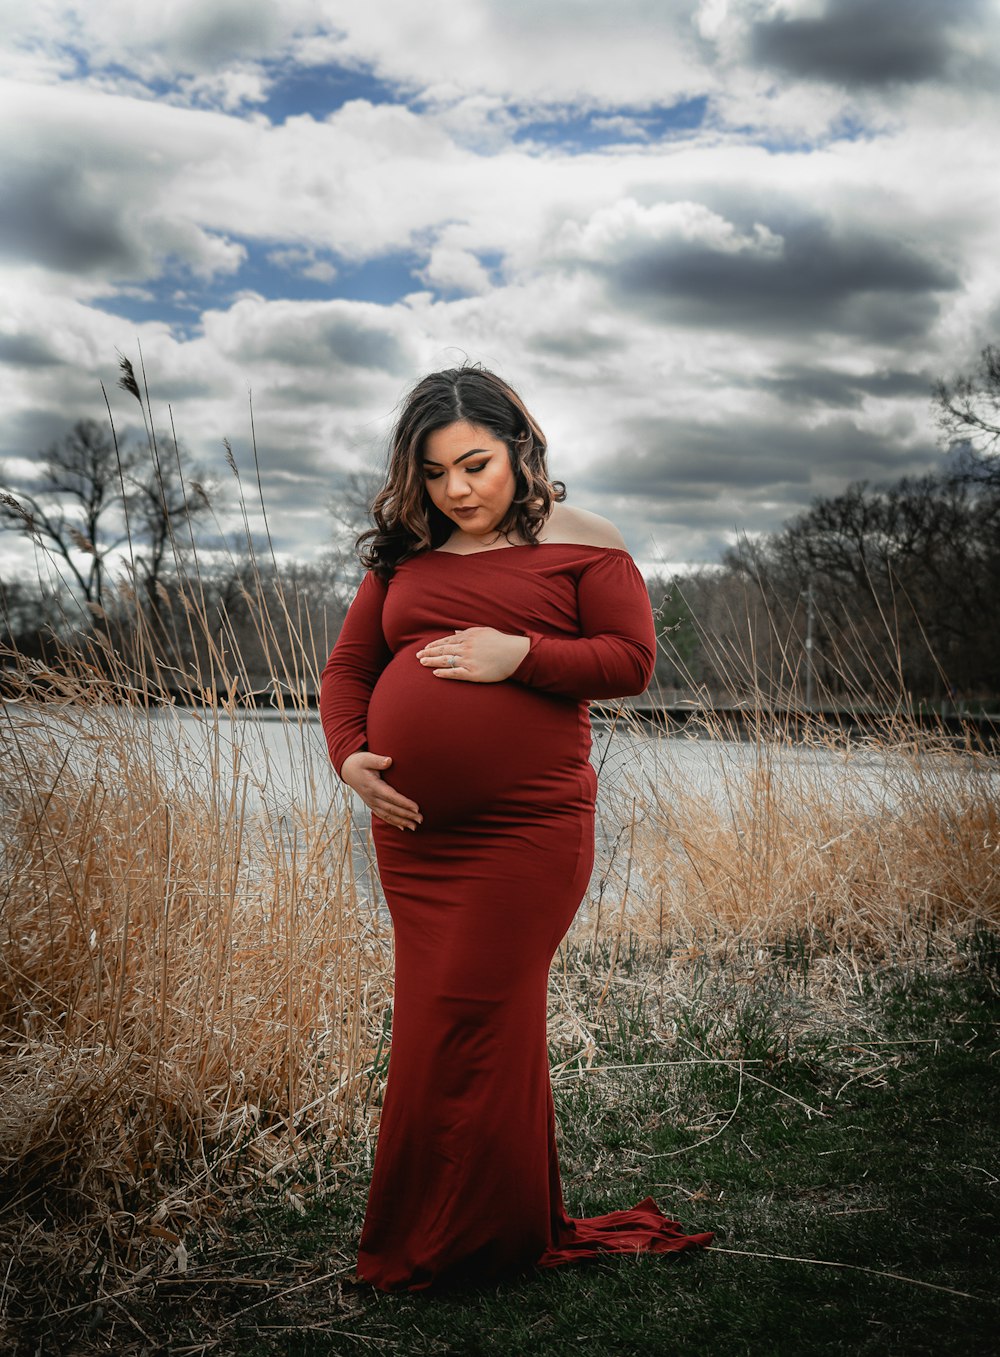 Maternity Shoot Pictures | Download Free Images on Unsplash session